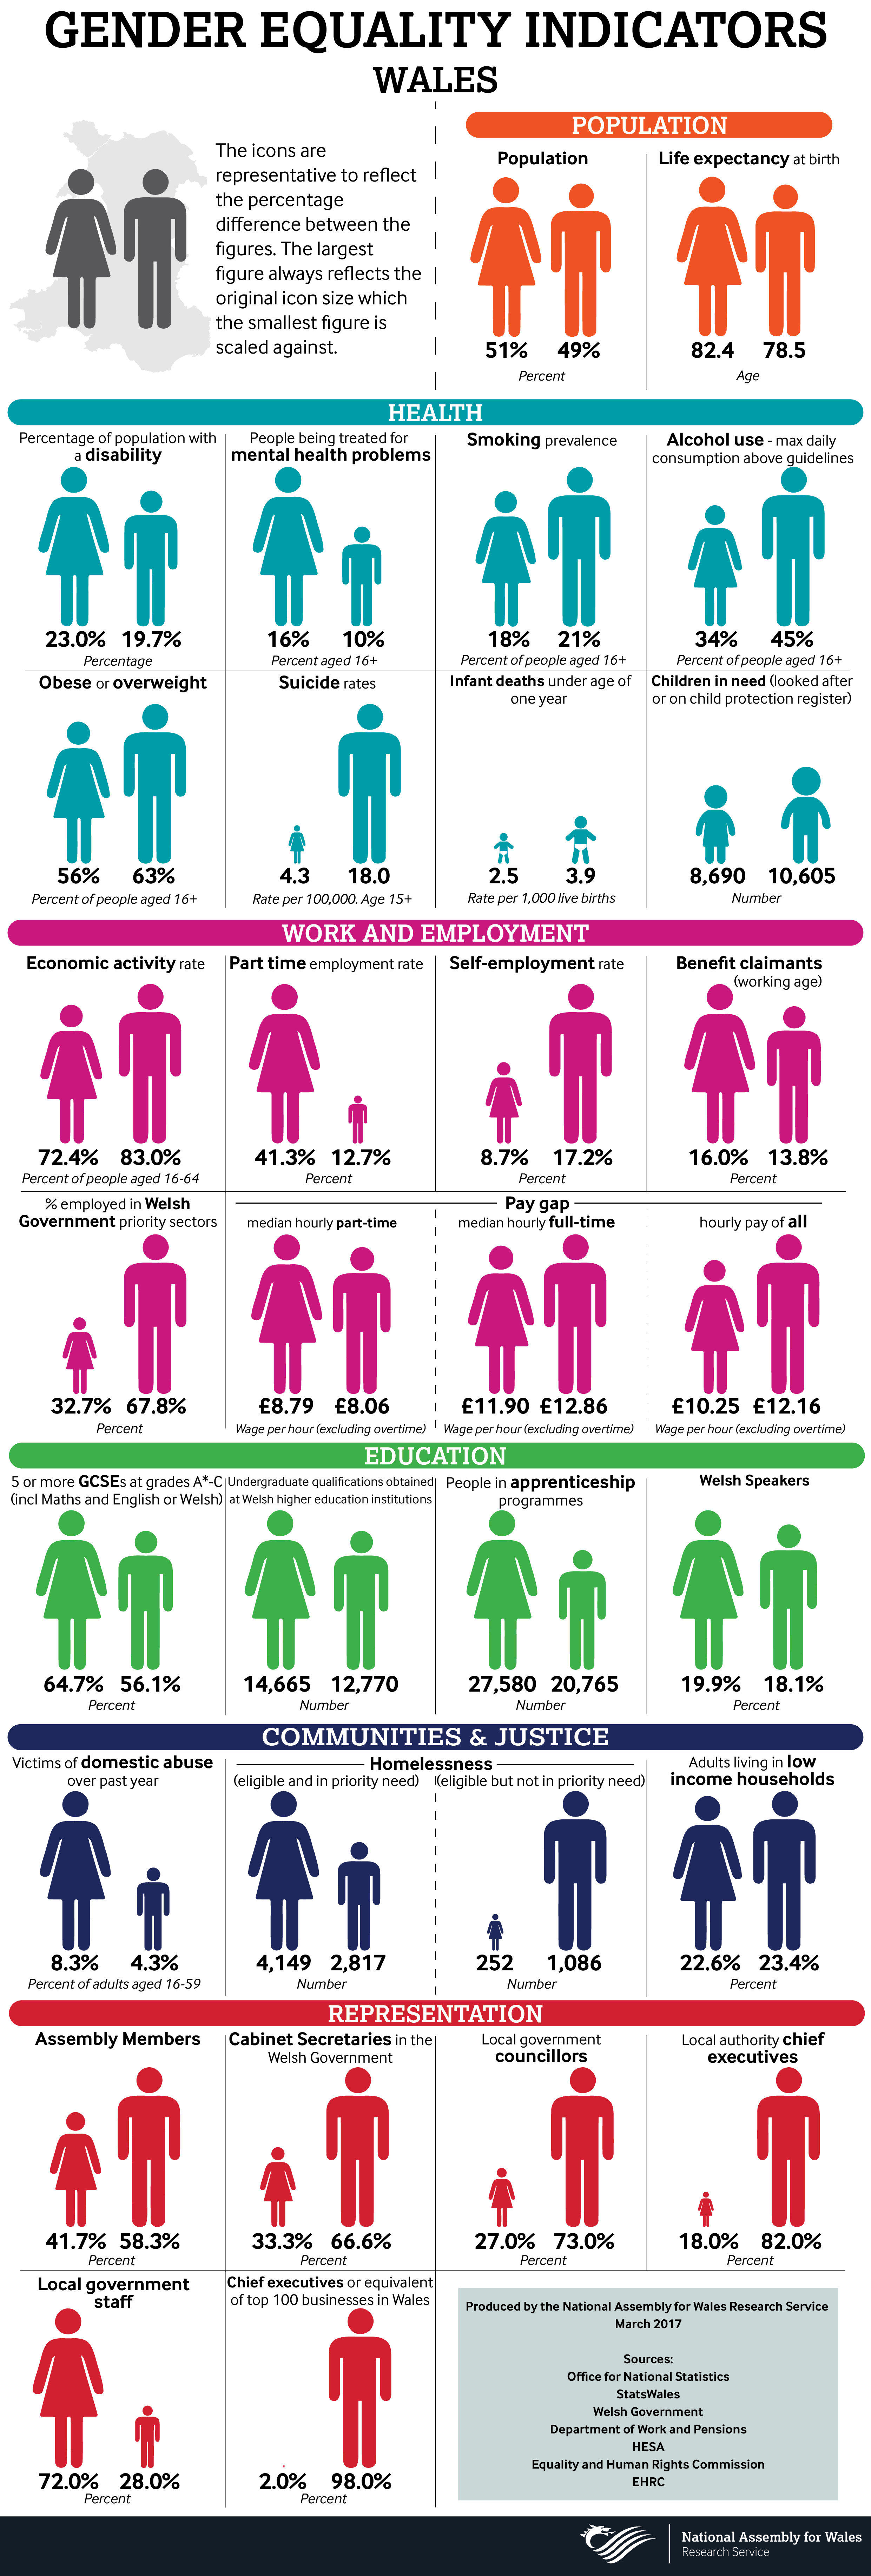 An infographic showing sex-disaggregated data for Wales